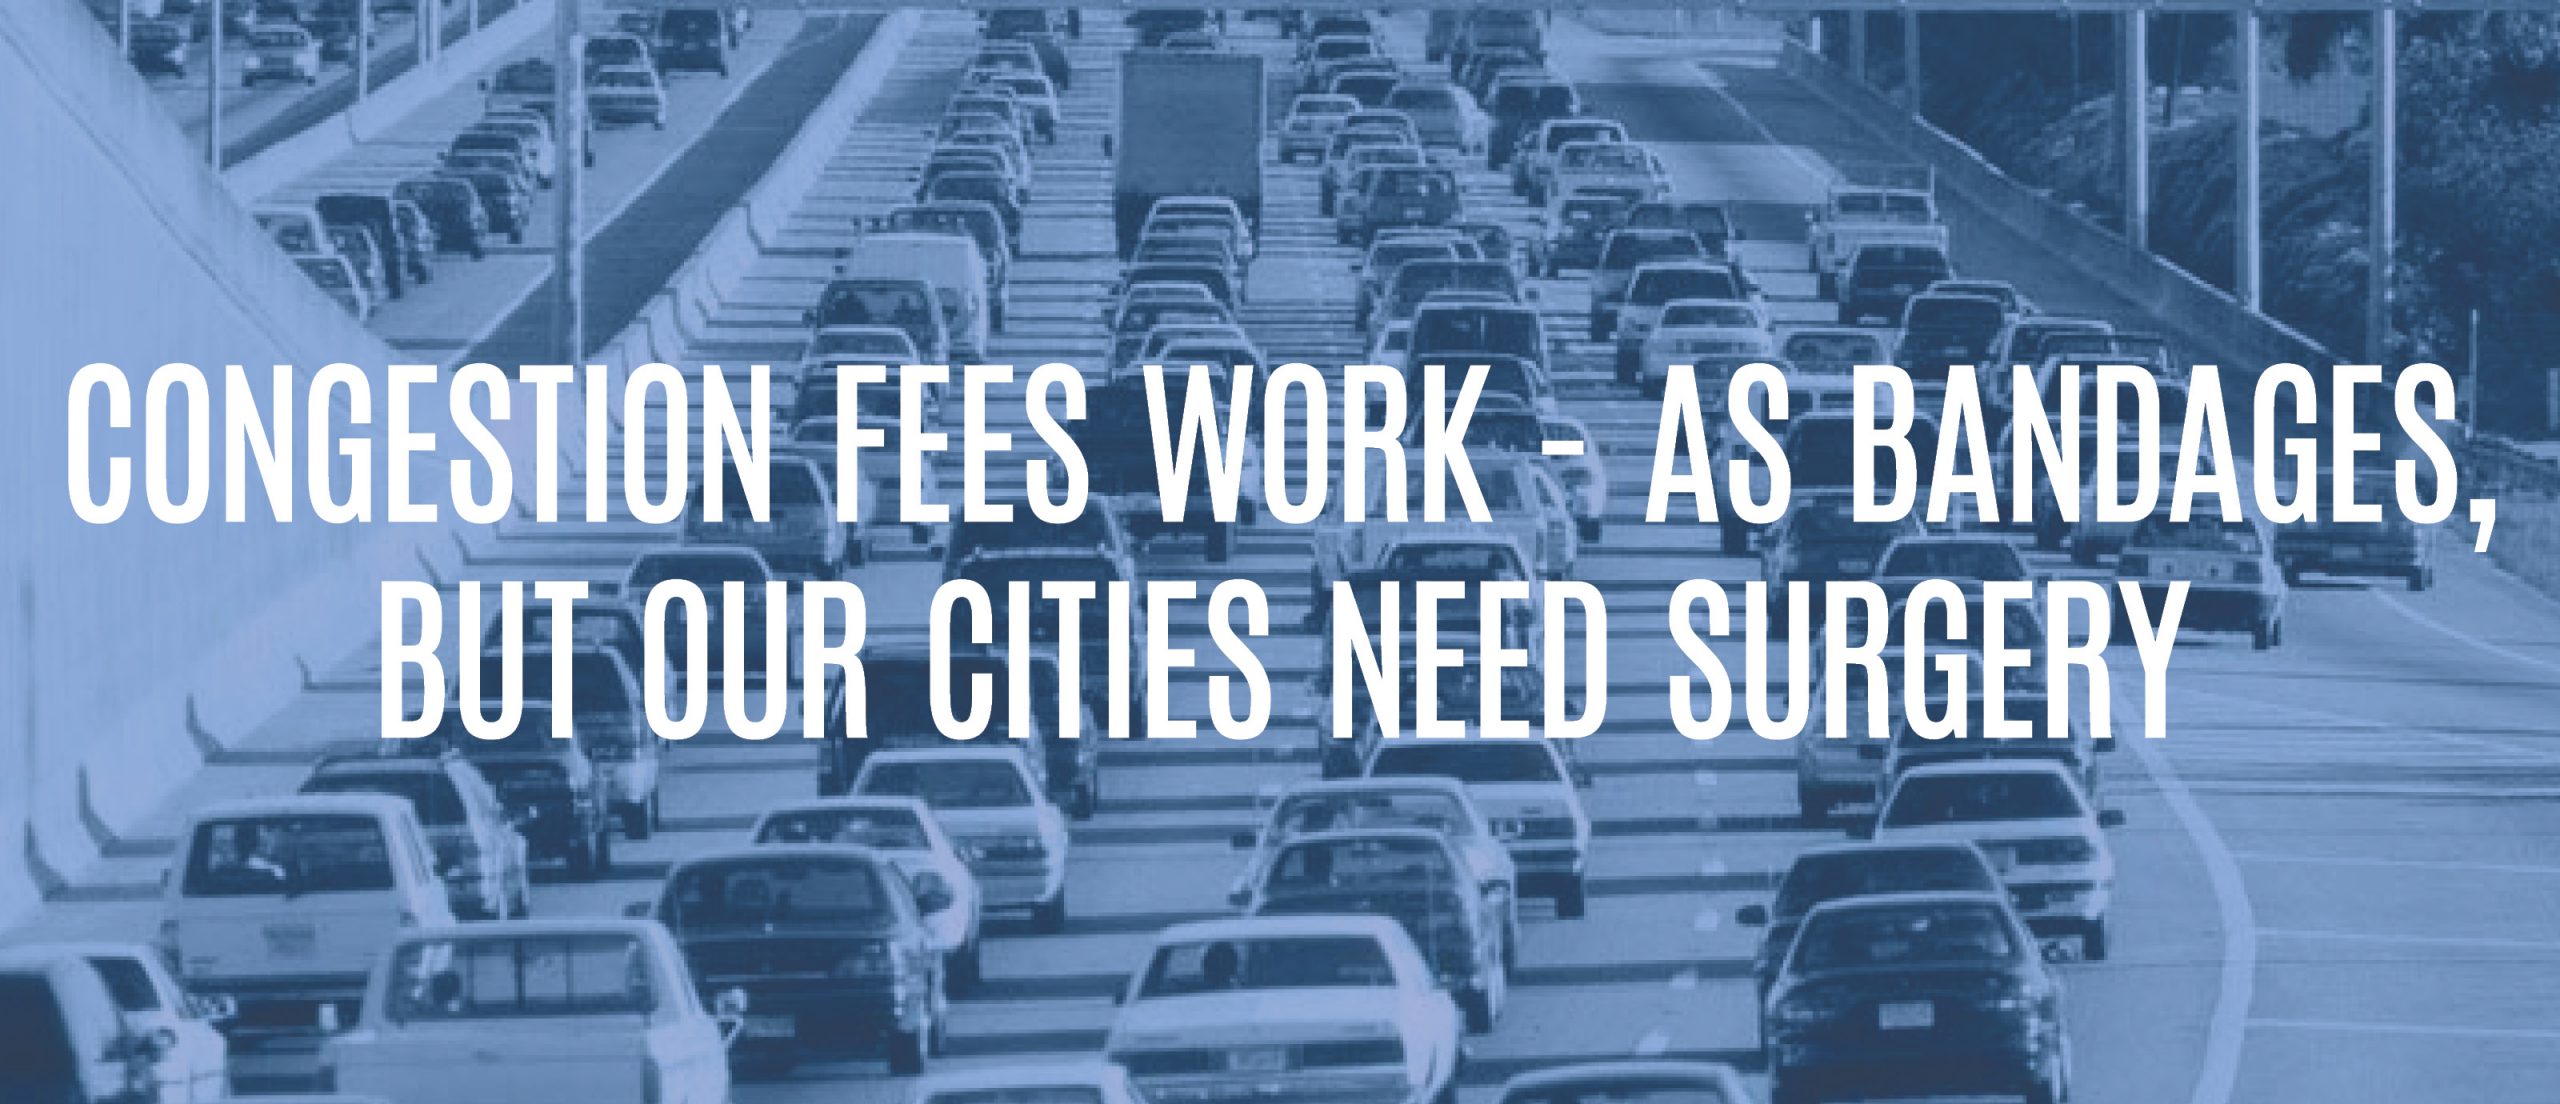 Blog title: Congestion fees work - as bandages, but our cities need surgery